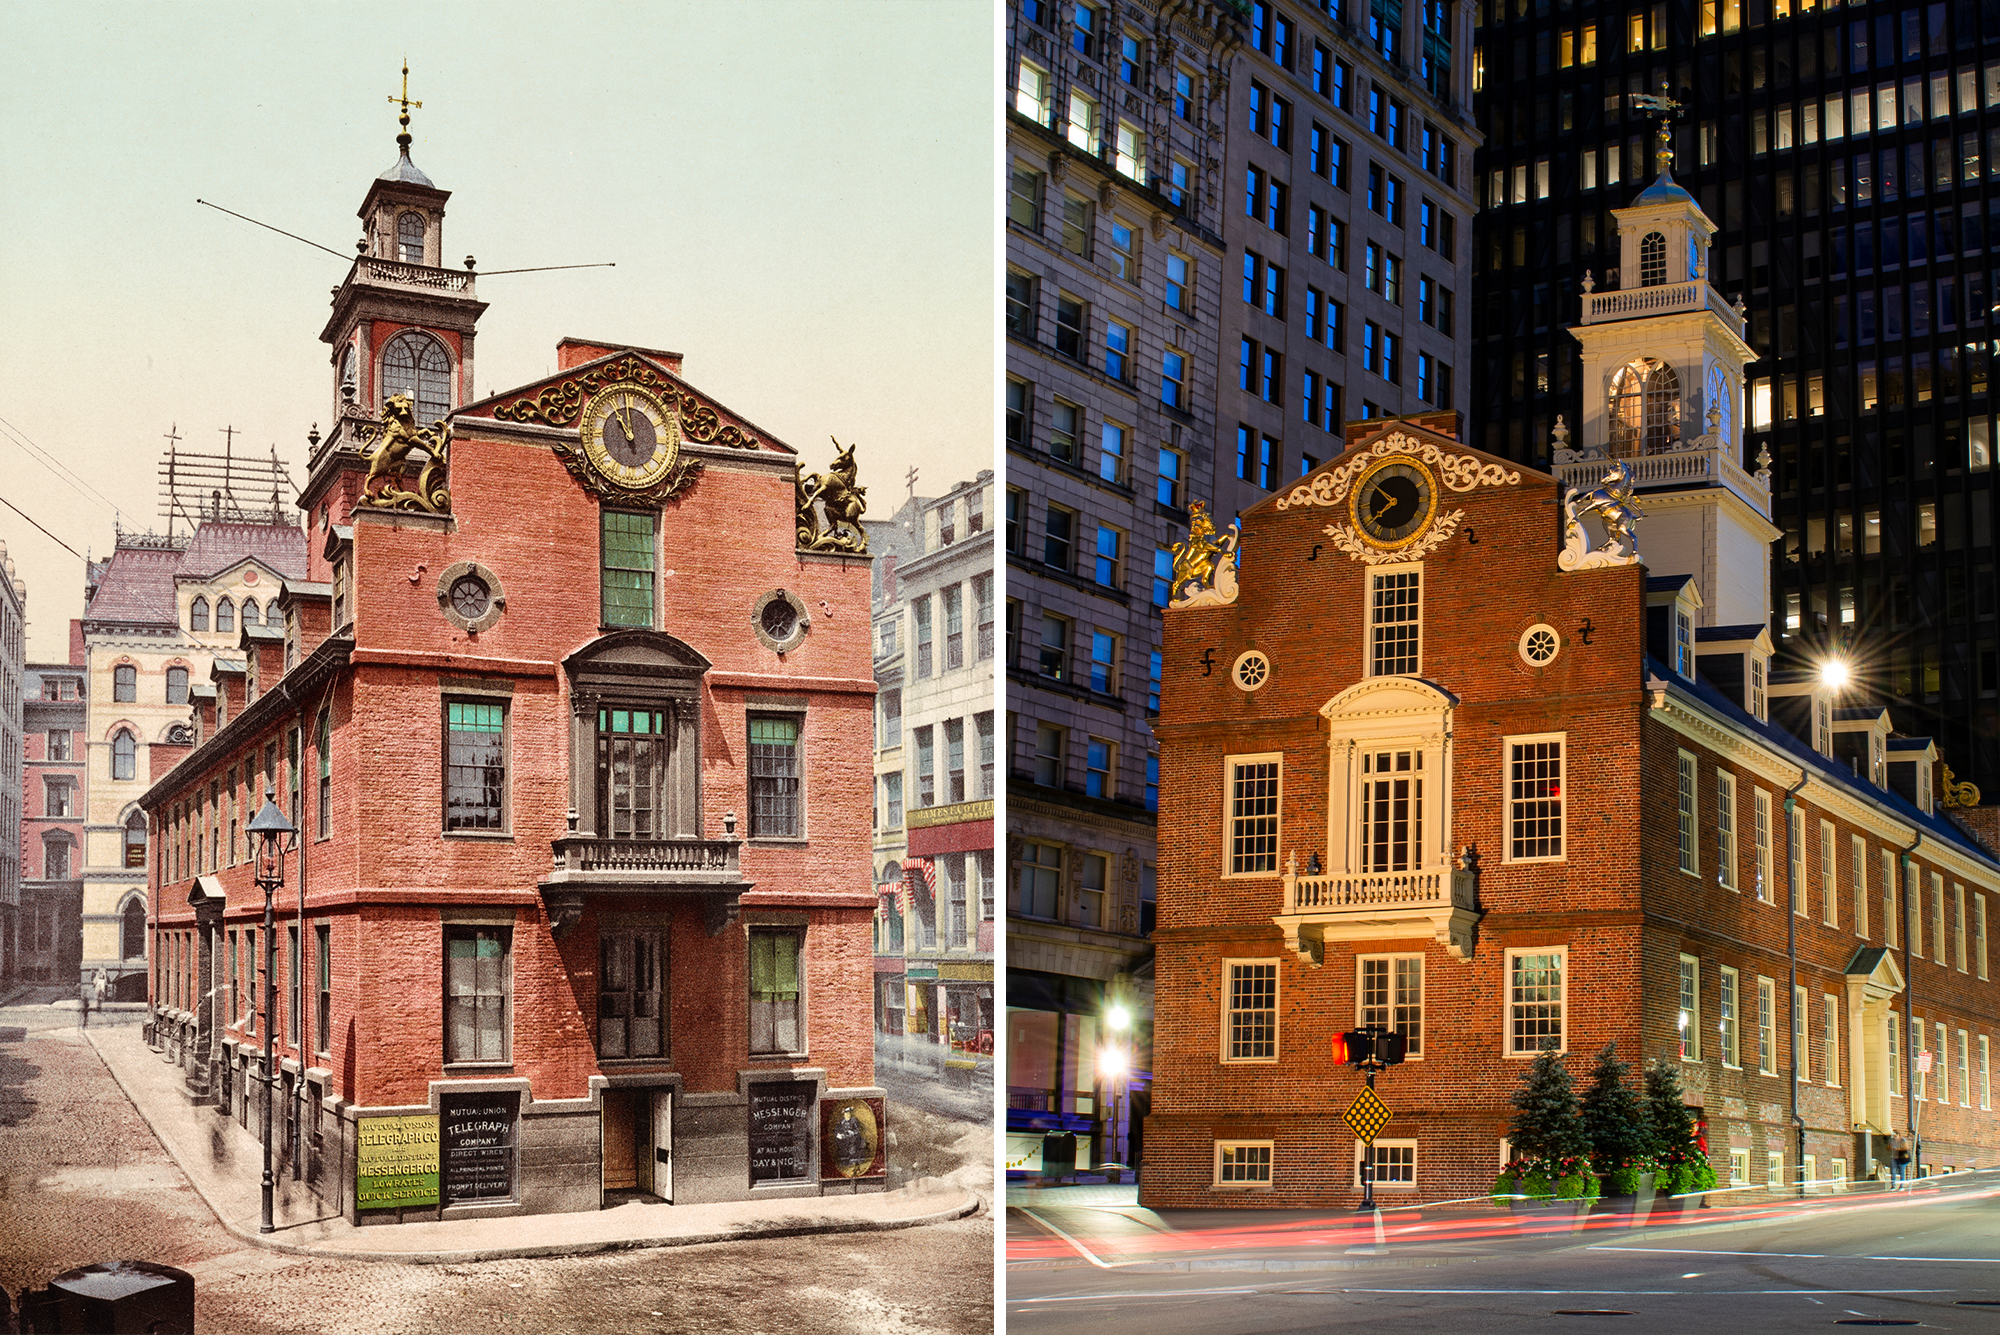 A photo of the Old State House in Boston